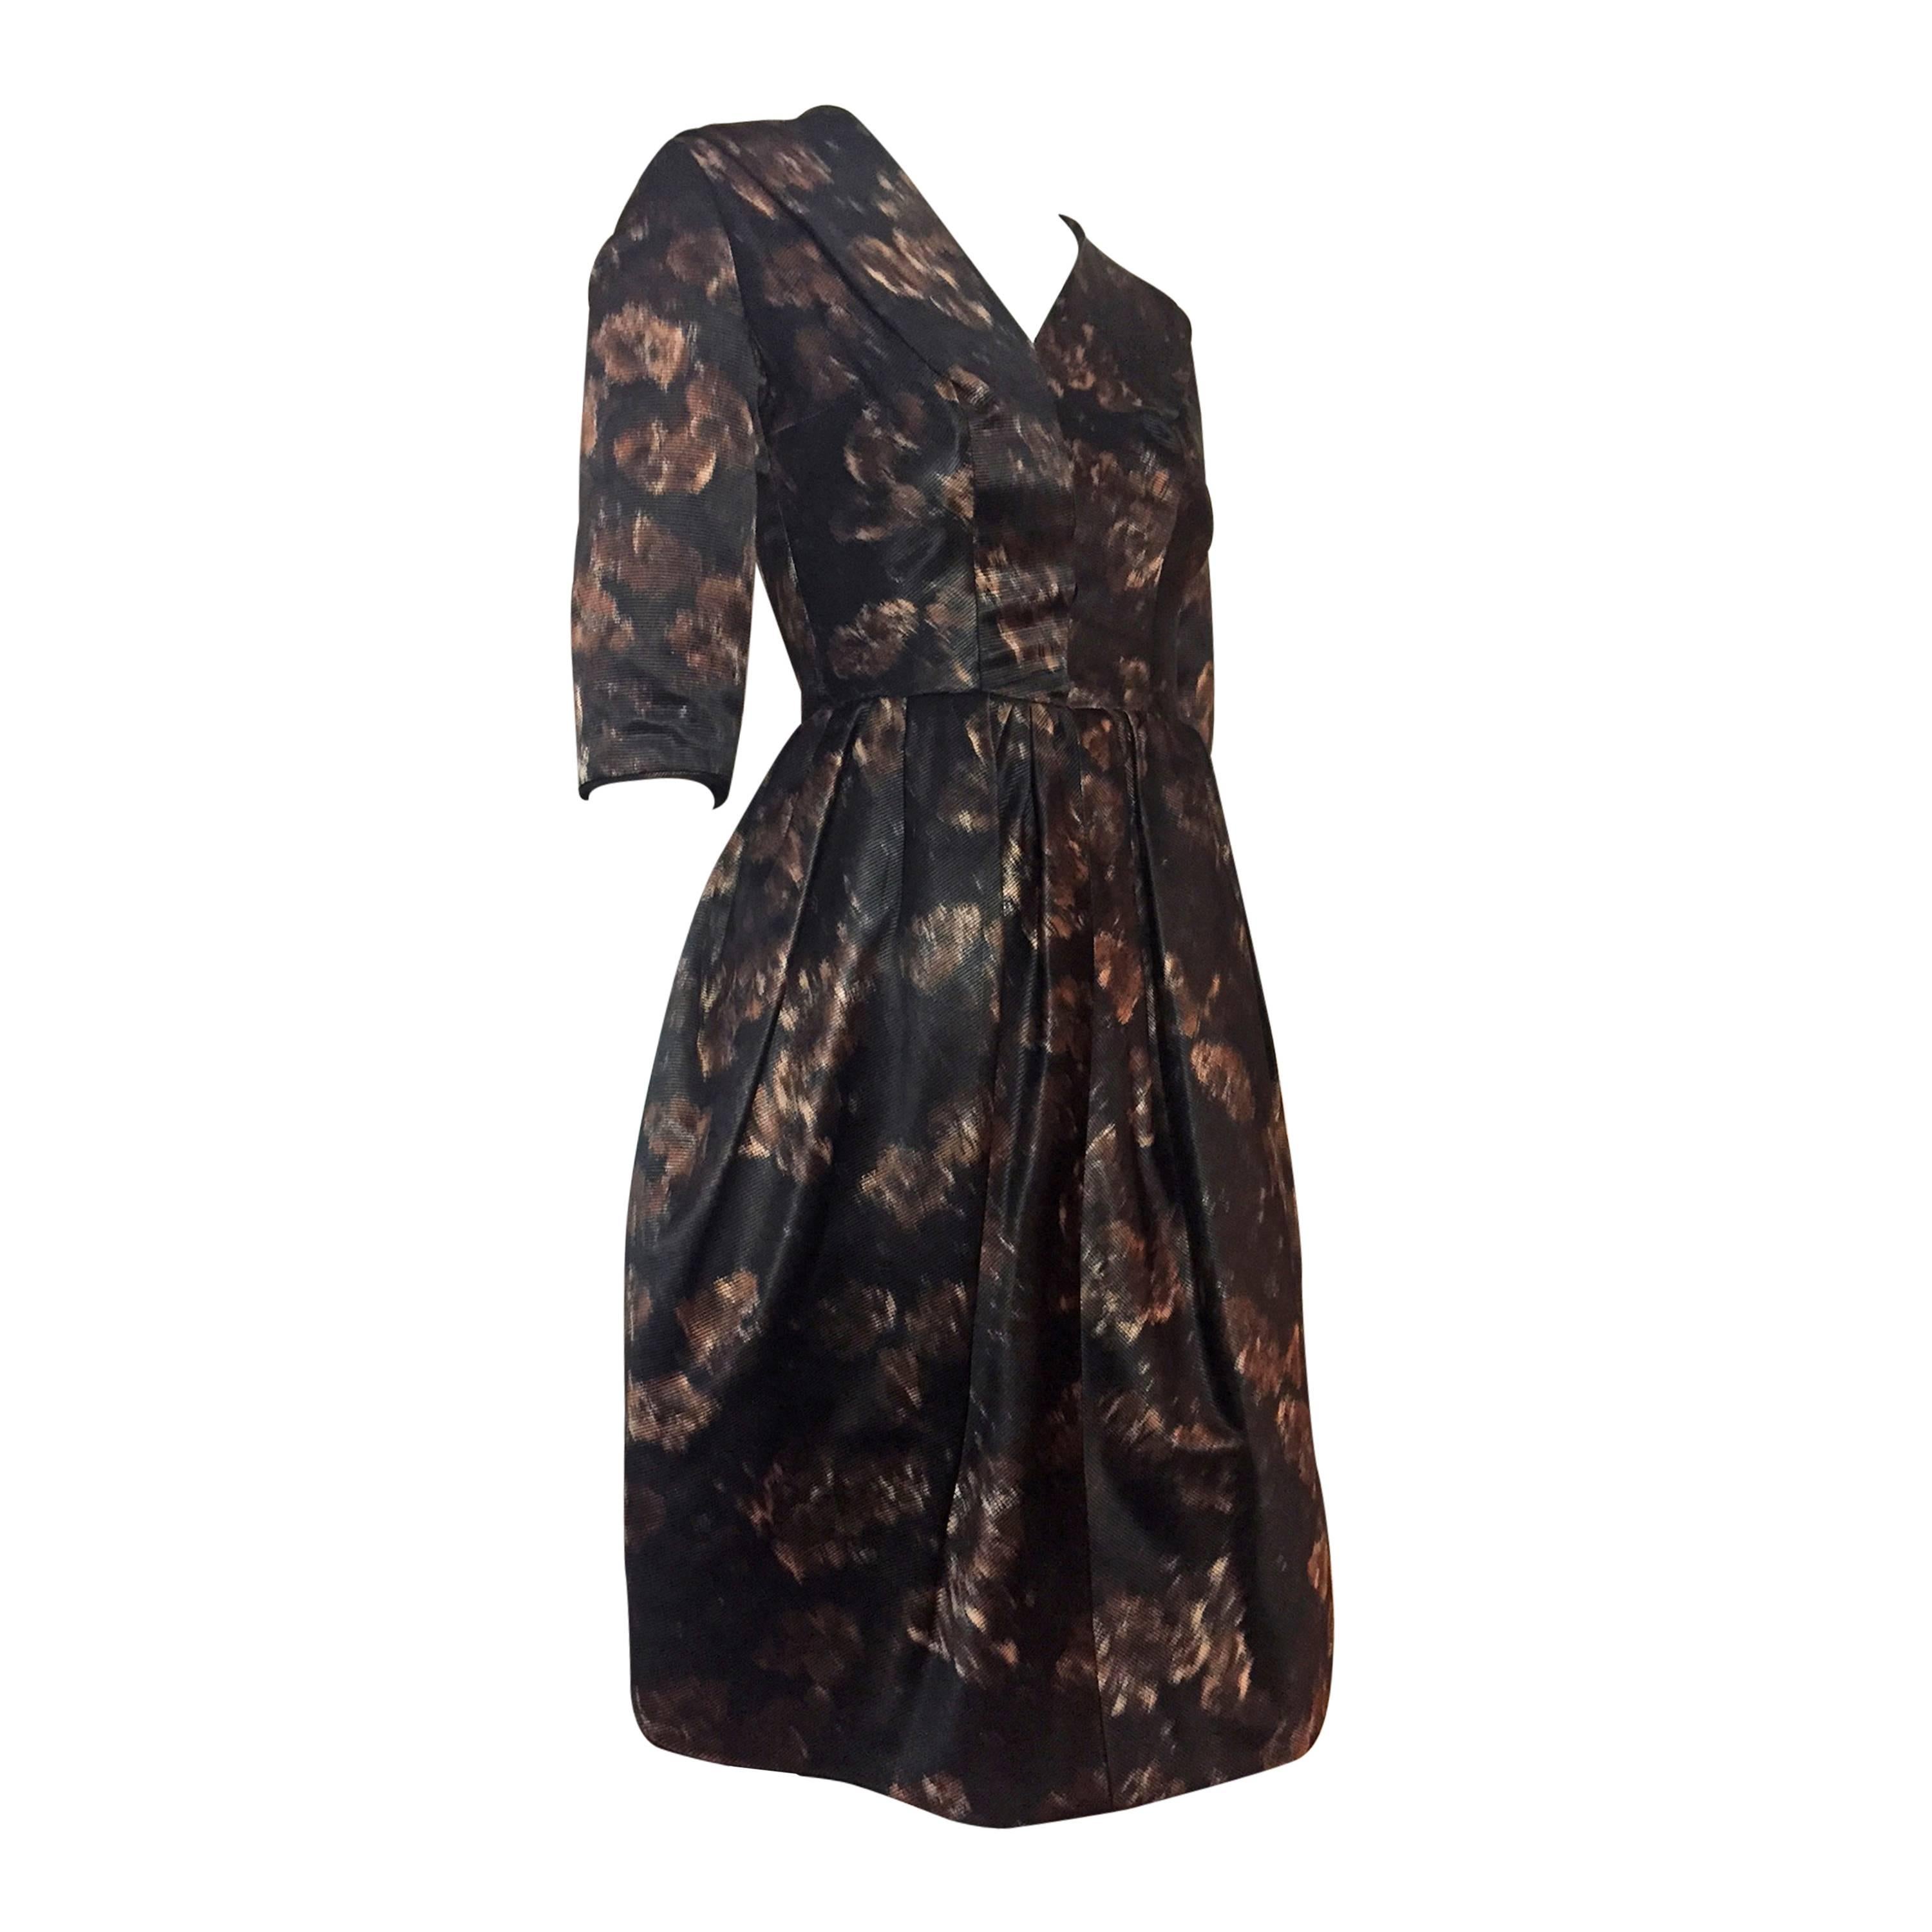 1950s Brown Black and Taupe Silk Floral Party Dress w/ Overskirt